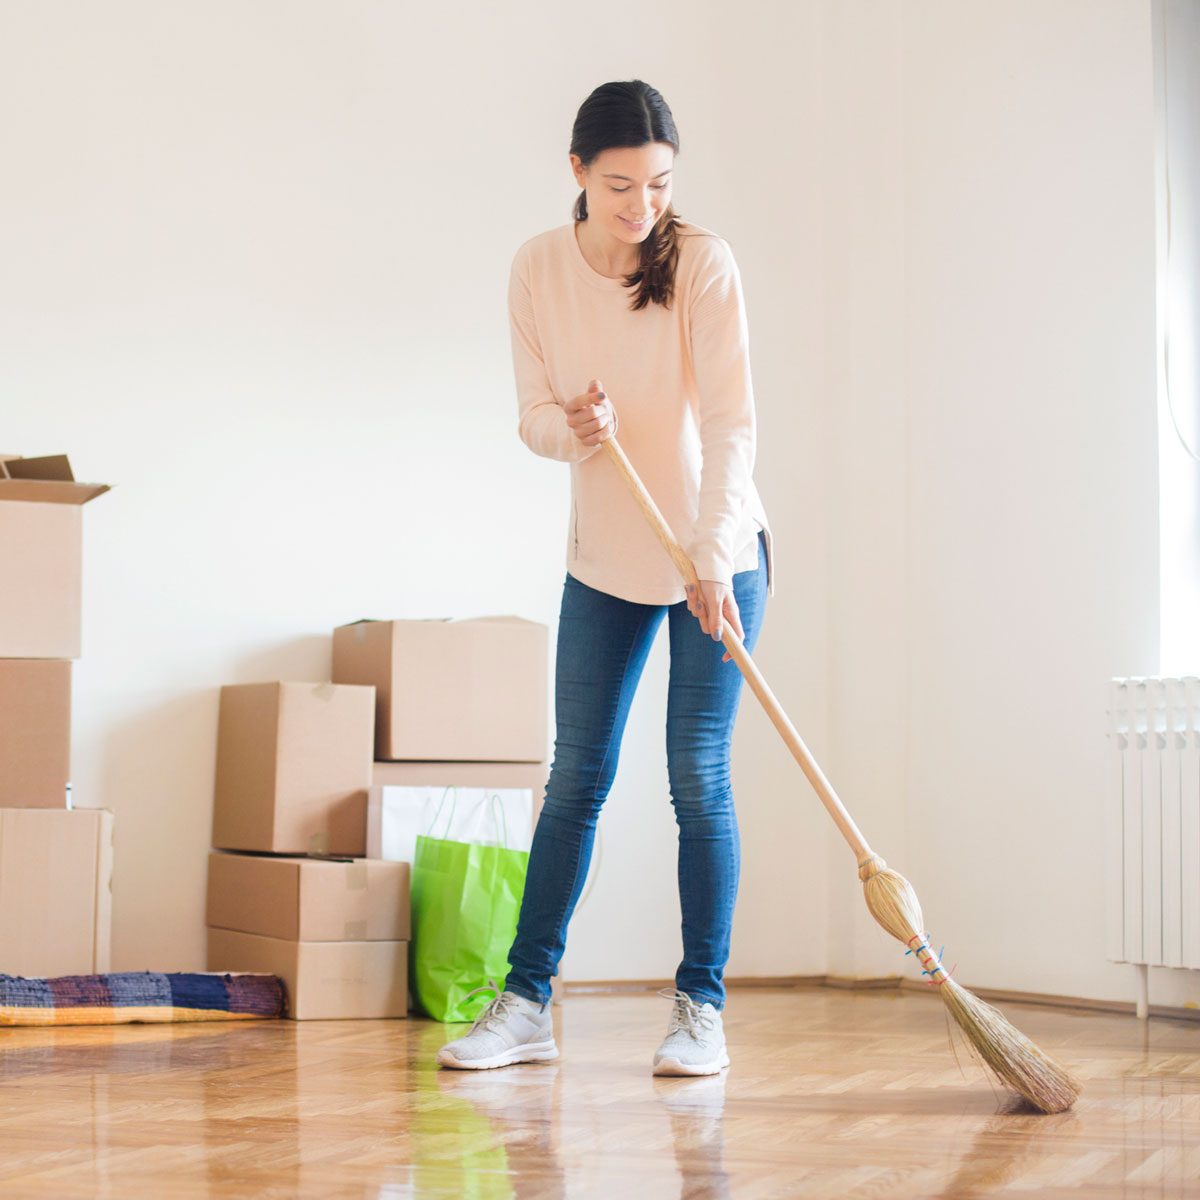 How to Clean a New Home